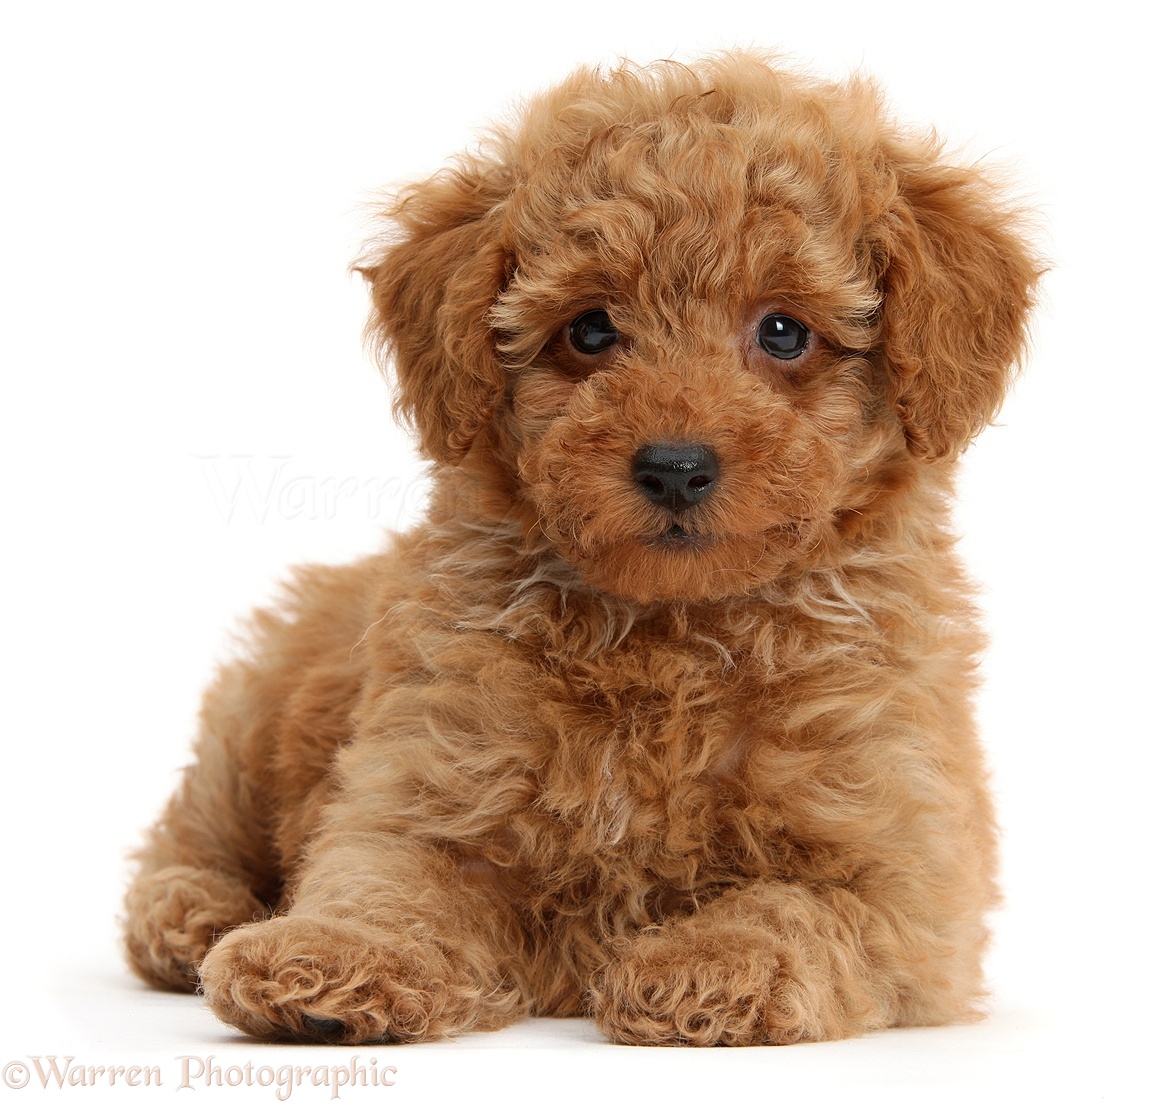 Dog: Cute red Toy Poodle puppy photo WP40748